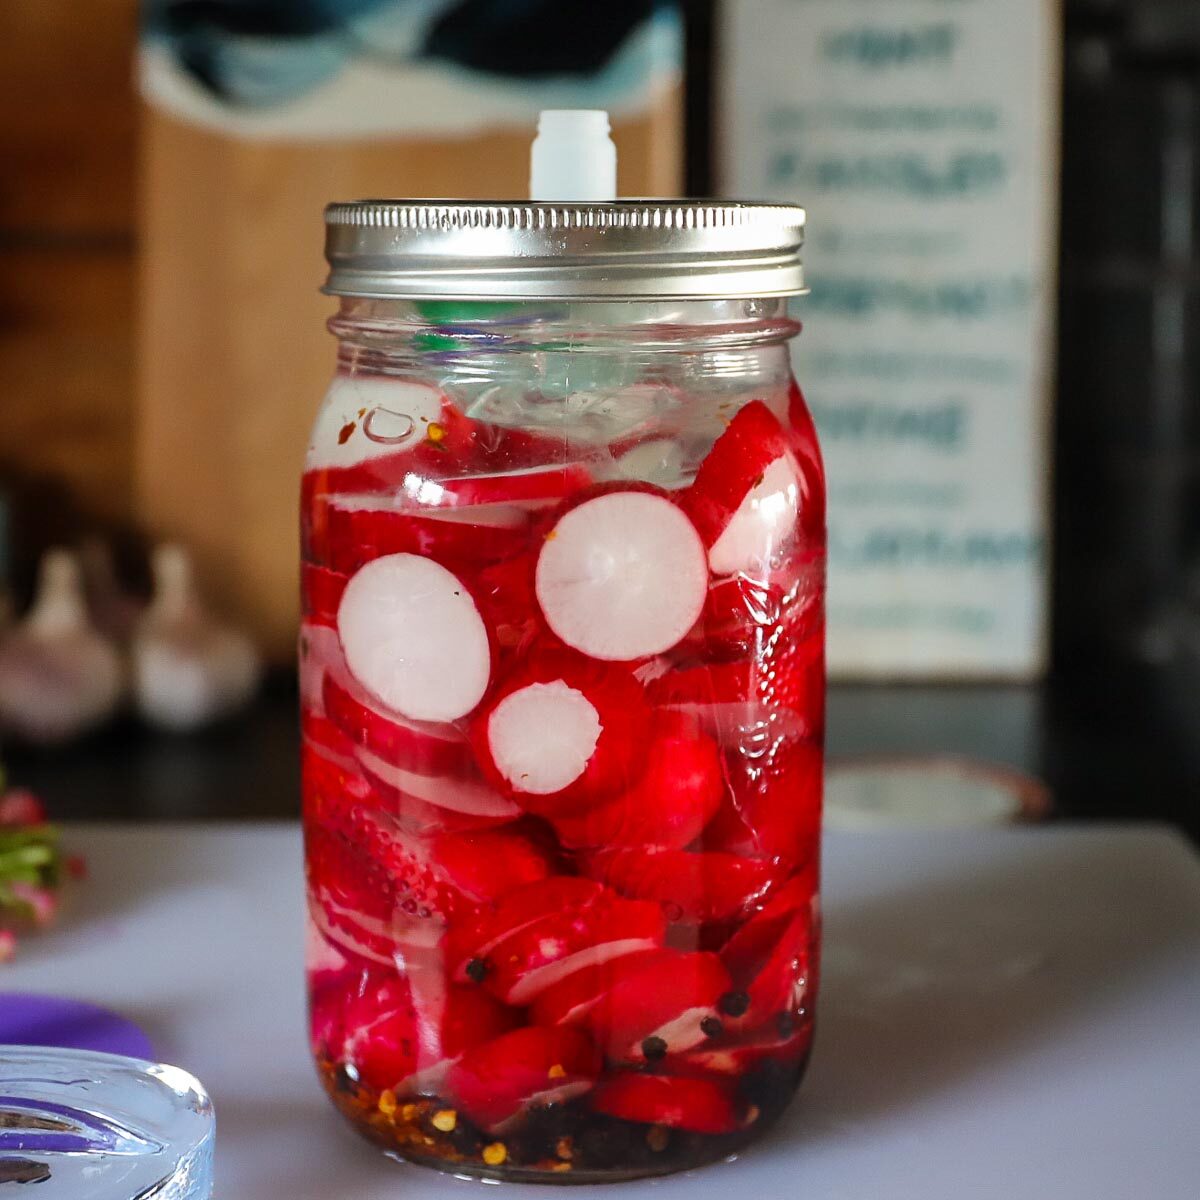 The jar of radishes now has the homemade fermentation weight on and is covered by a pickle pipe lid secured by the silver jar ring.